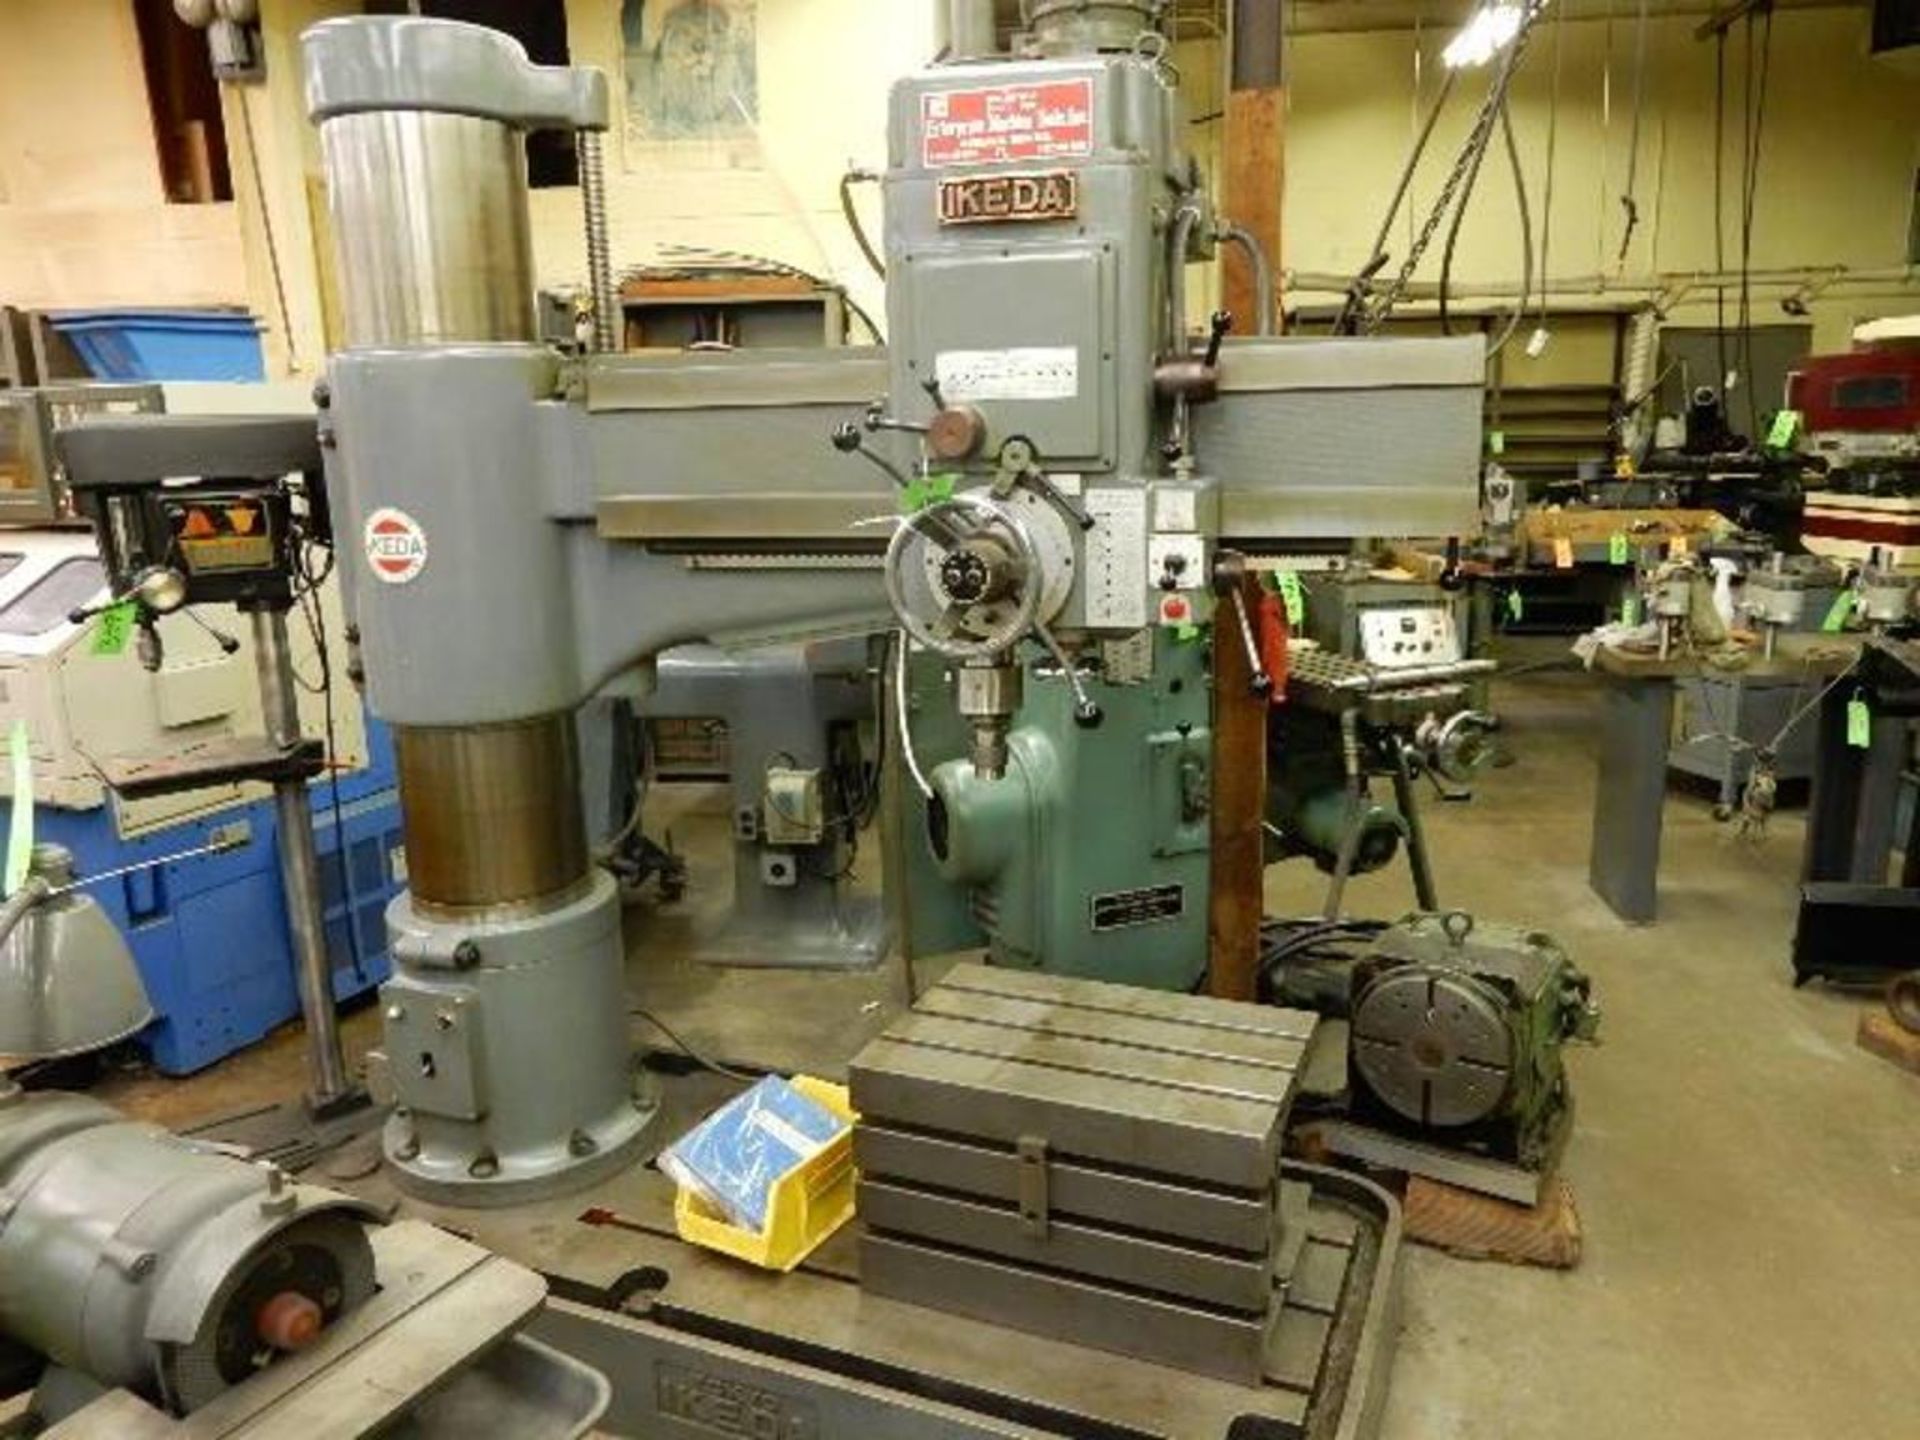 Ikeda Model RM-1375 Radial Arm Drill, 13" Column, 5' Arm, 30-1500 RPM Spindle Speeds, 26.5" - Image 15 of 27